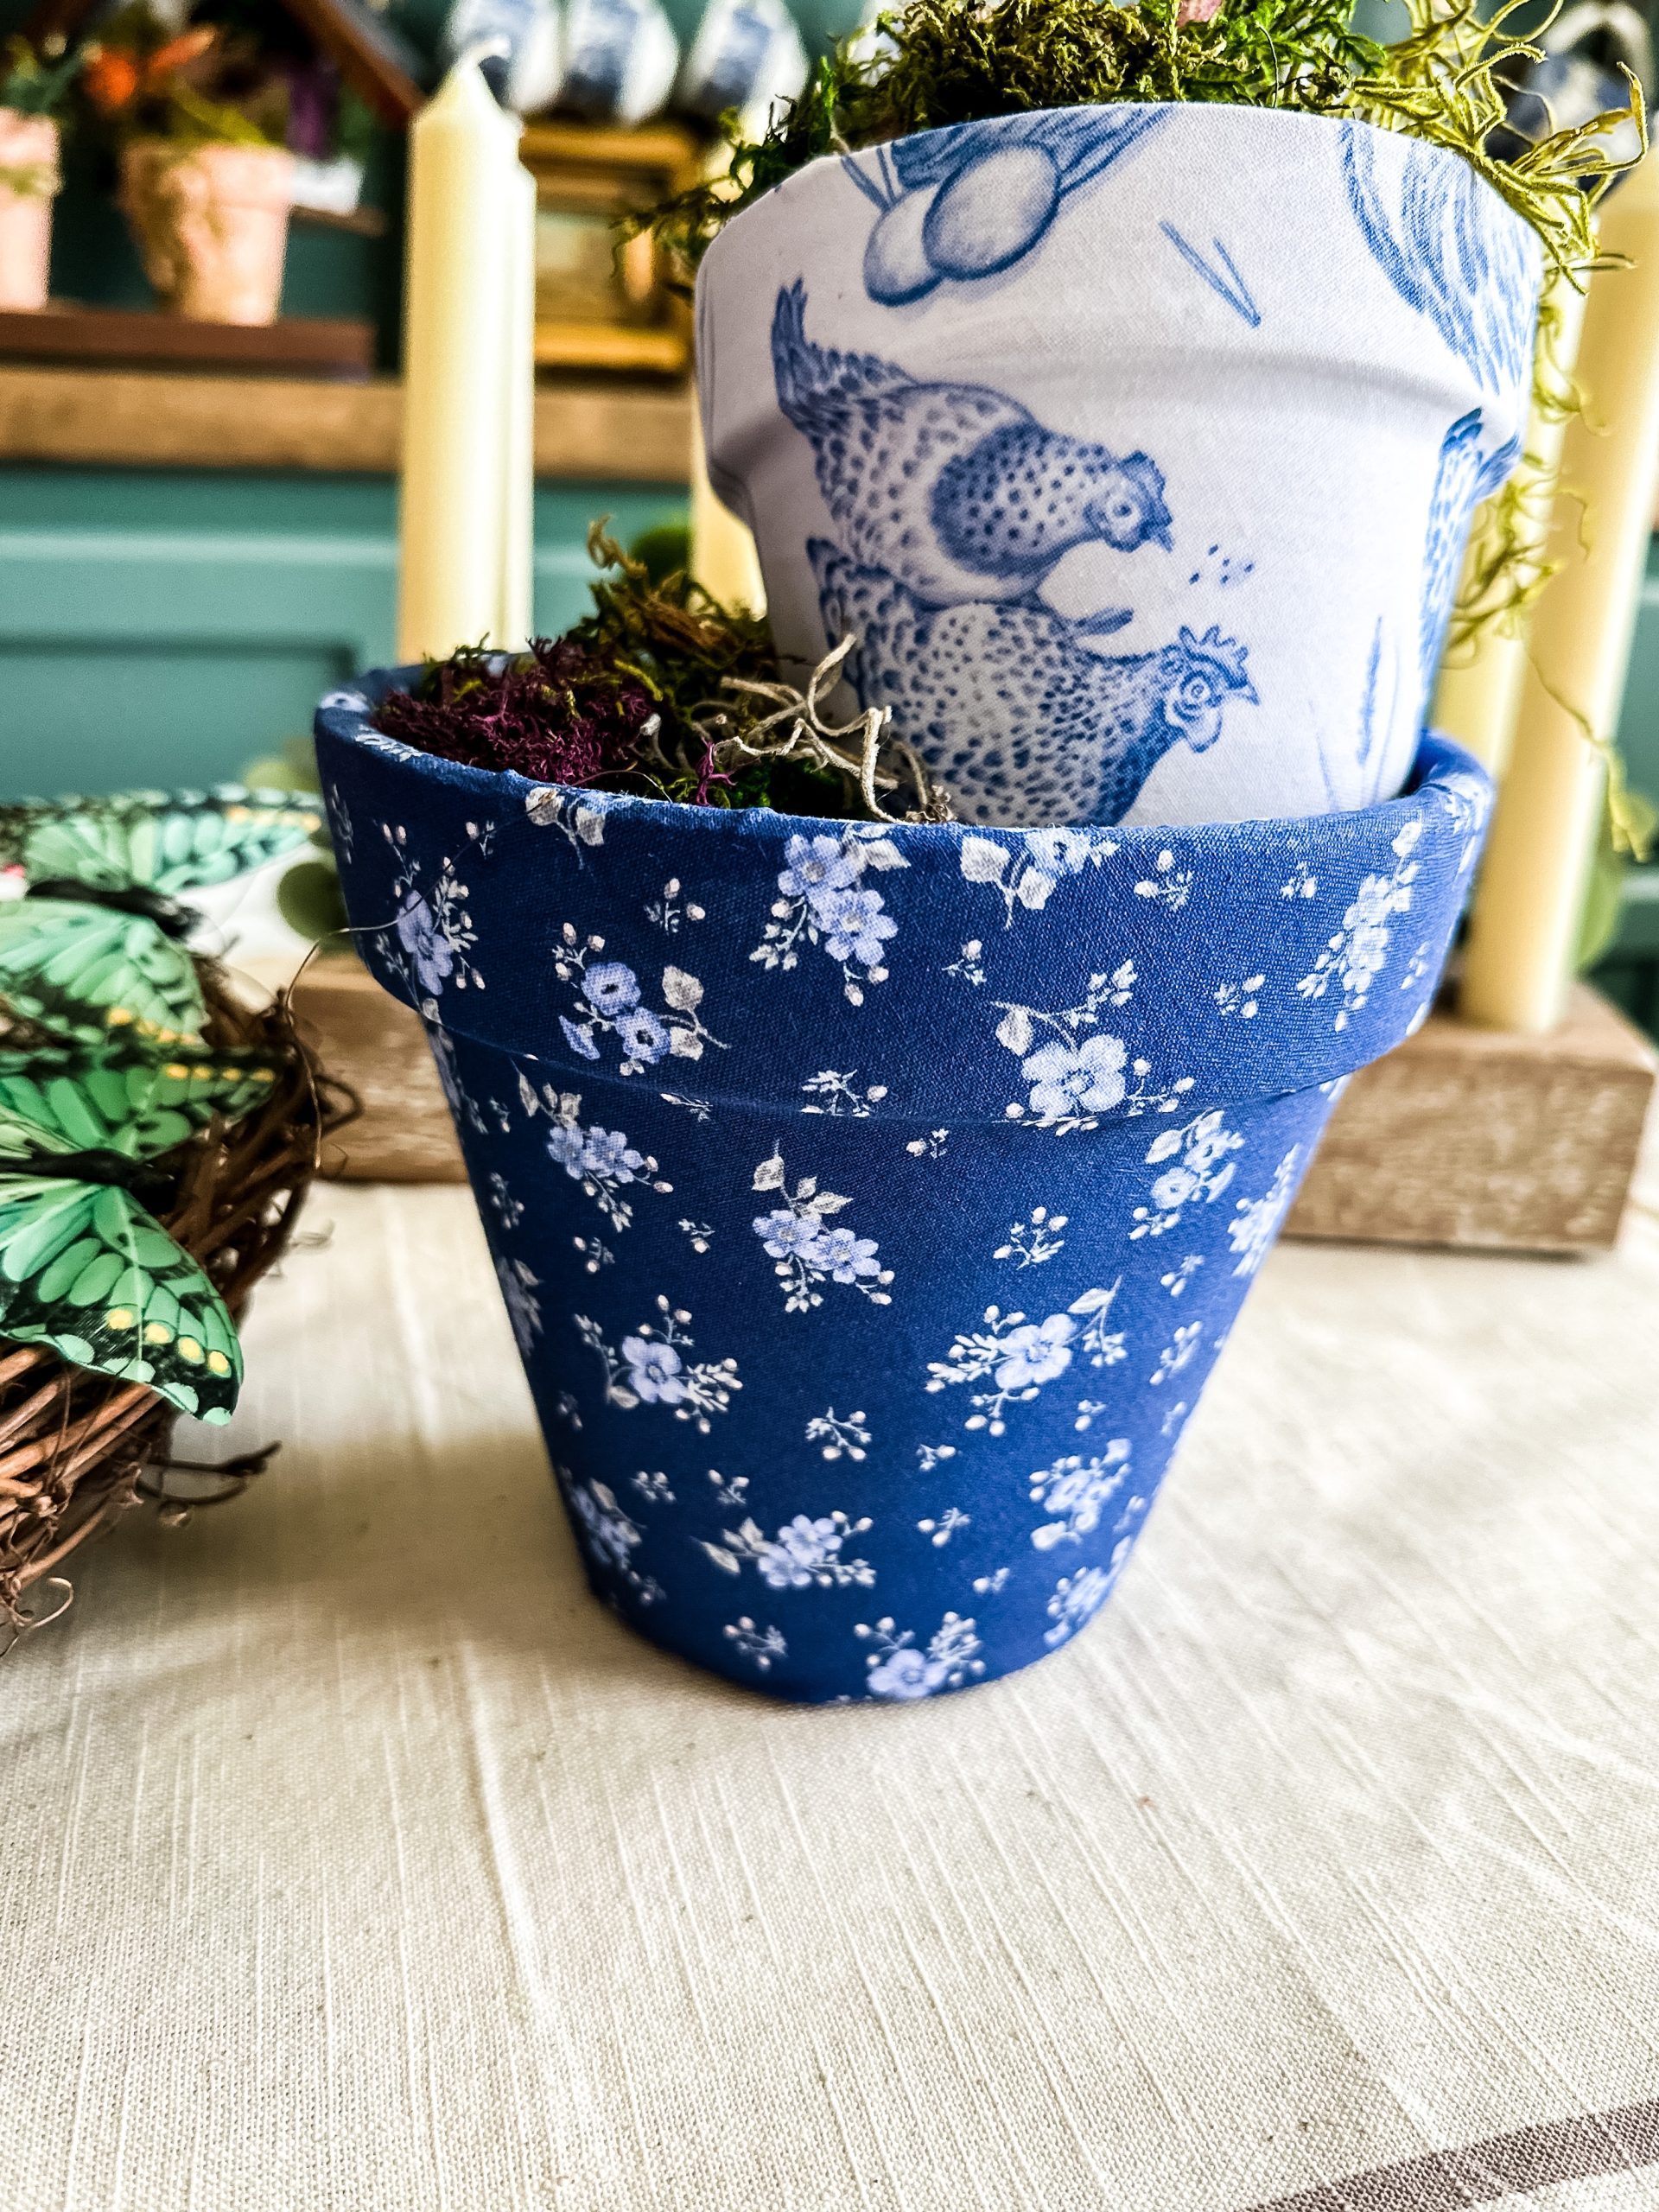 upcycled terra cotta pots covered in fabric